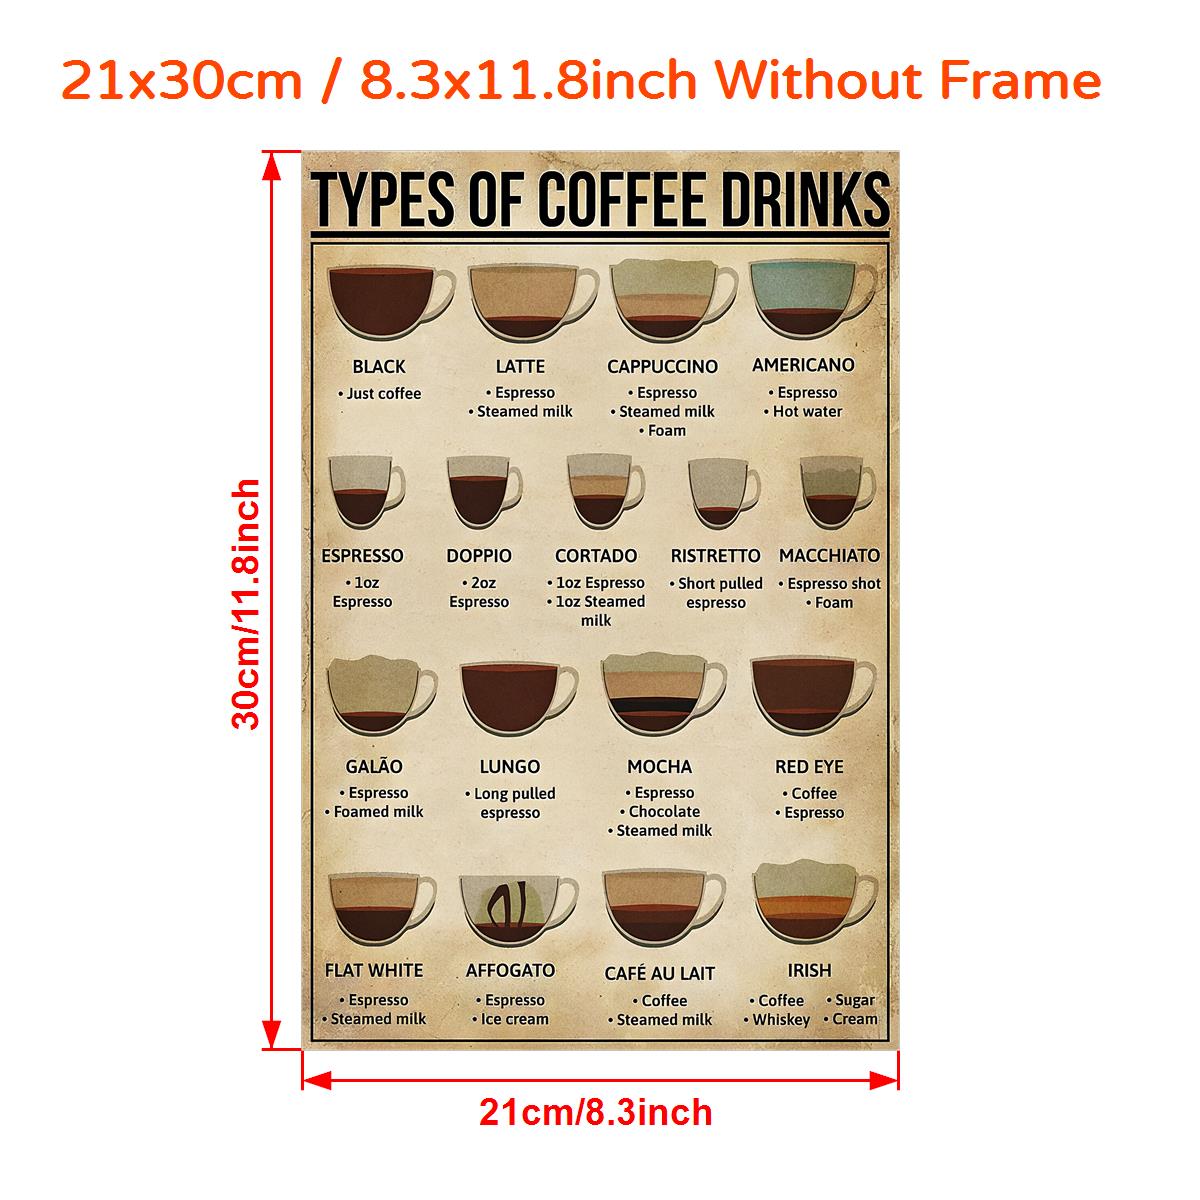 21 Different Types of Espresso Drinks (With Pictures)